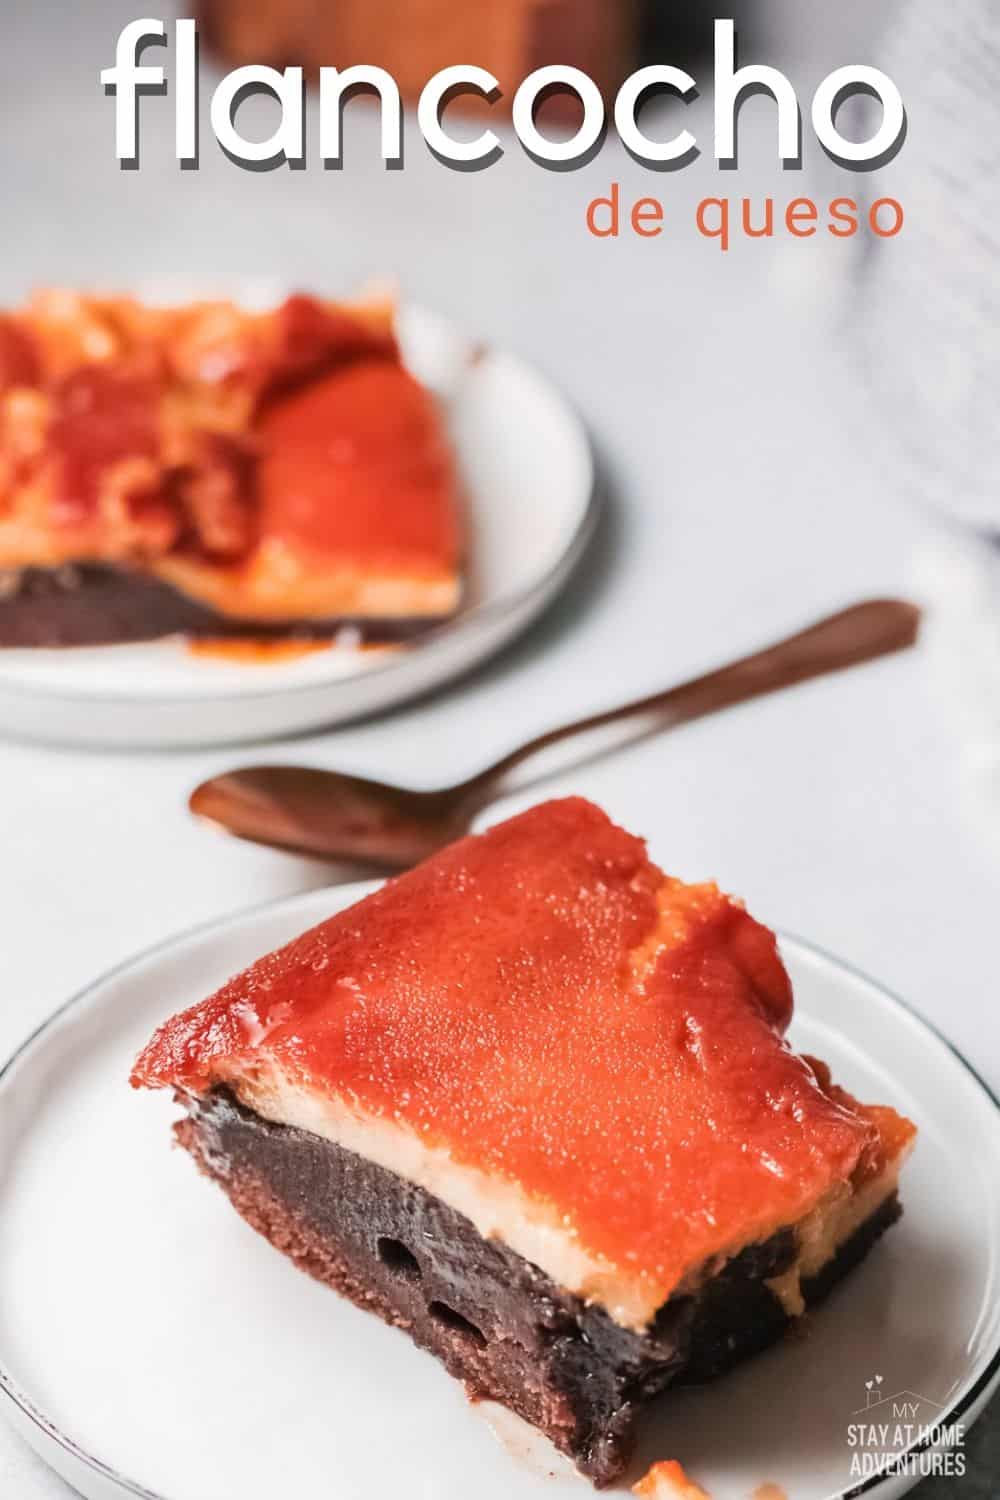 This recipe for Puerto Rican flancocho is a traditional dessert made of two types: cake and flan. It's easy to make but tastes indulgent! Find out how to make this delicious, rich dish that'll impress your friends and family in minutes flat. via @mystayathome